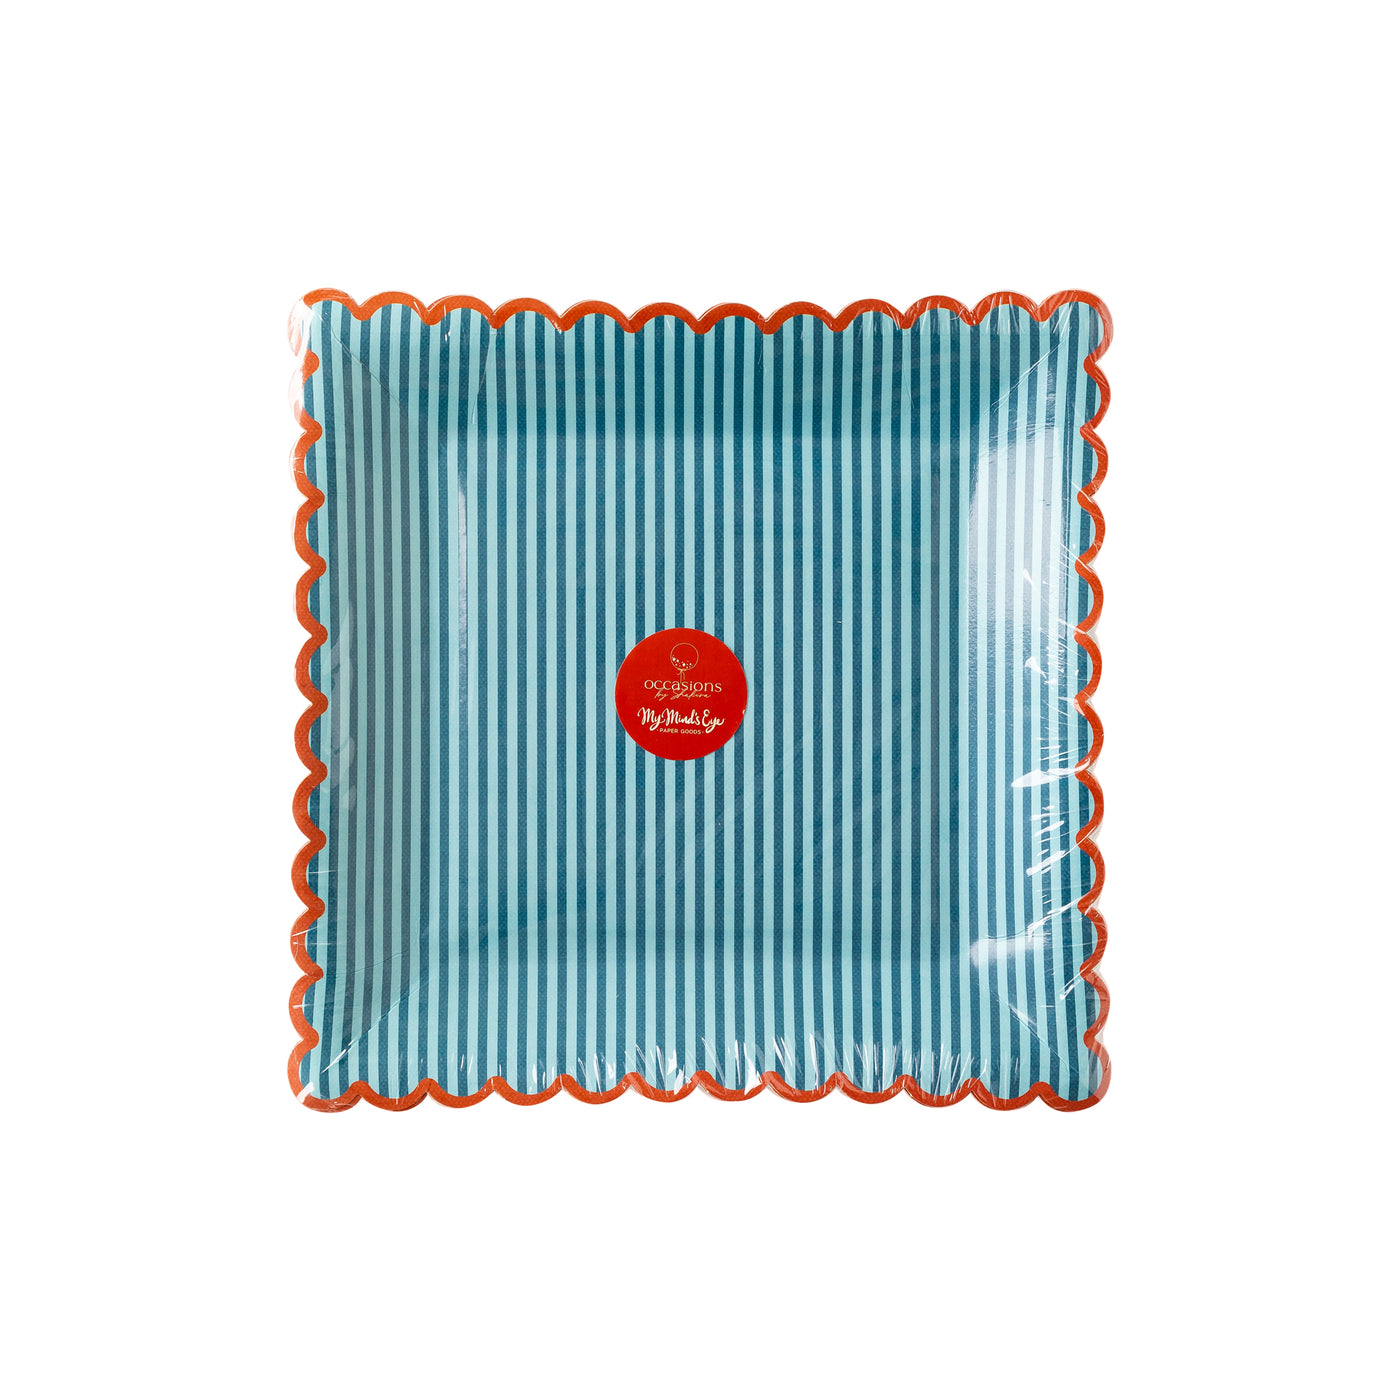 Occasions by Shakira - Red with Blue Stripe Plate